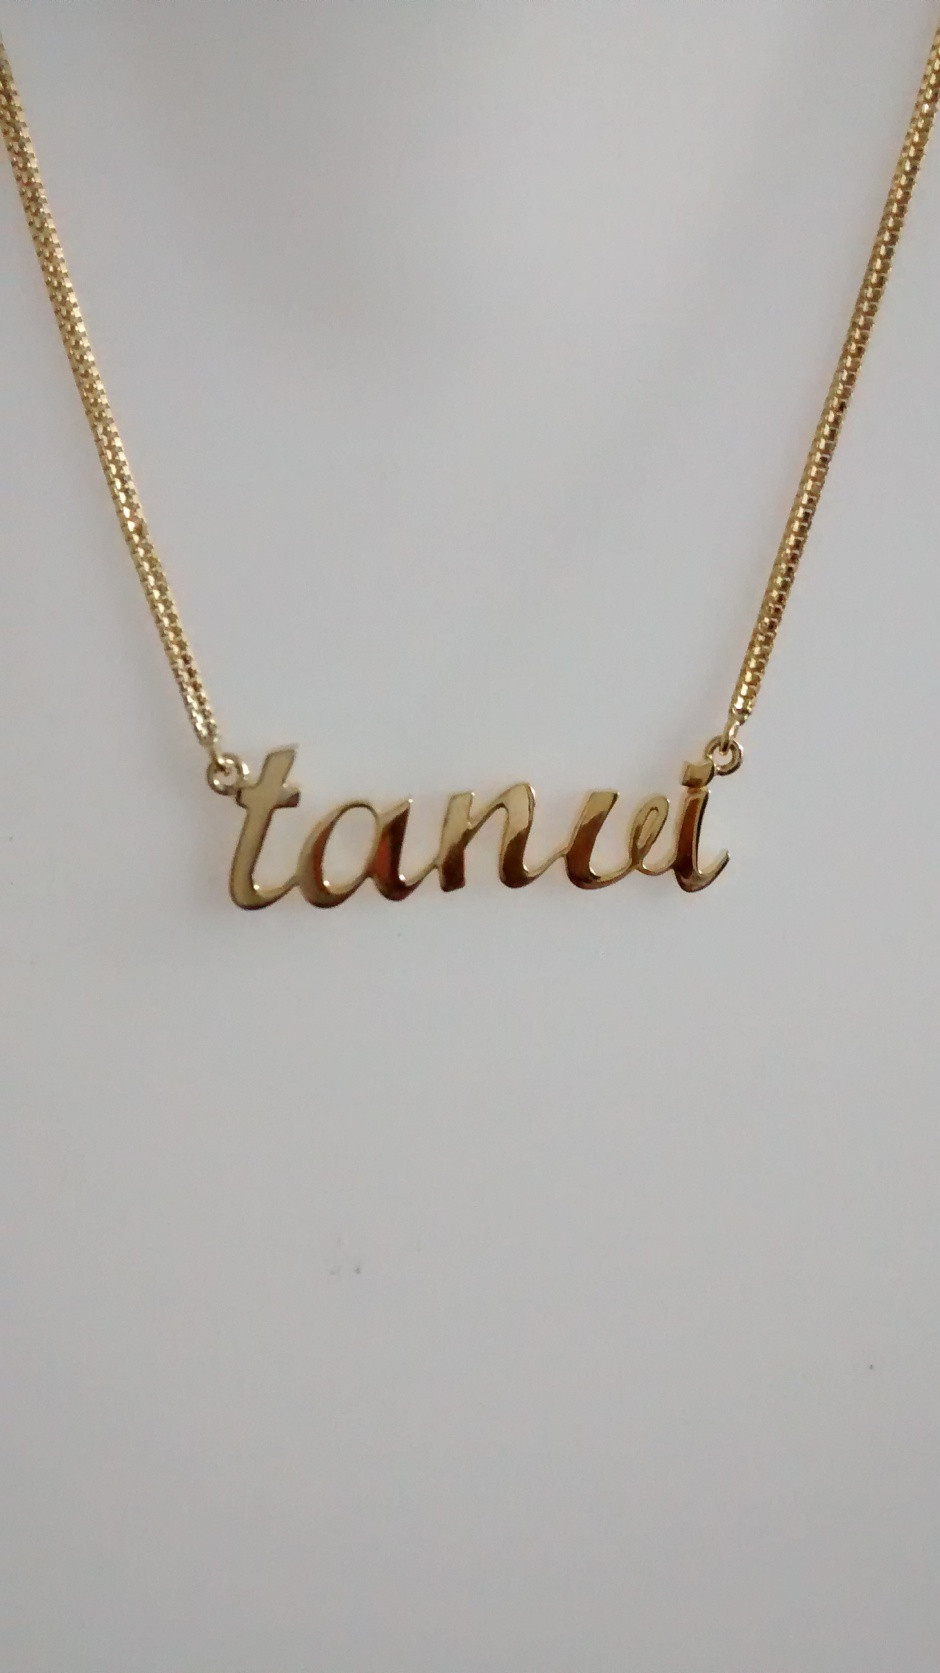 Necklace With Name
 How To Get A Custom Name Pendant Necklace Made in India